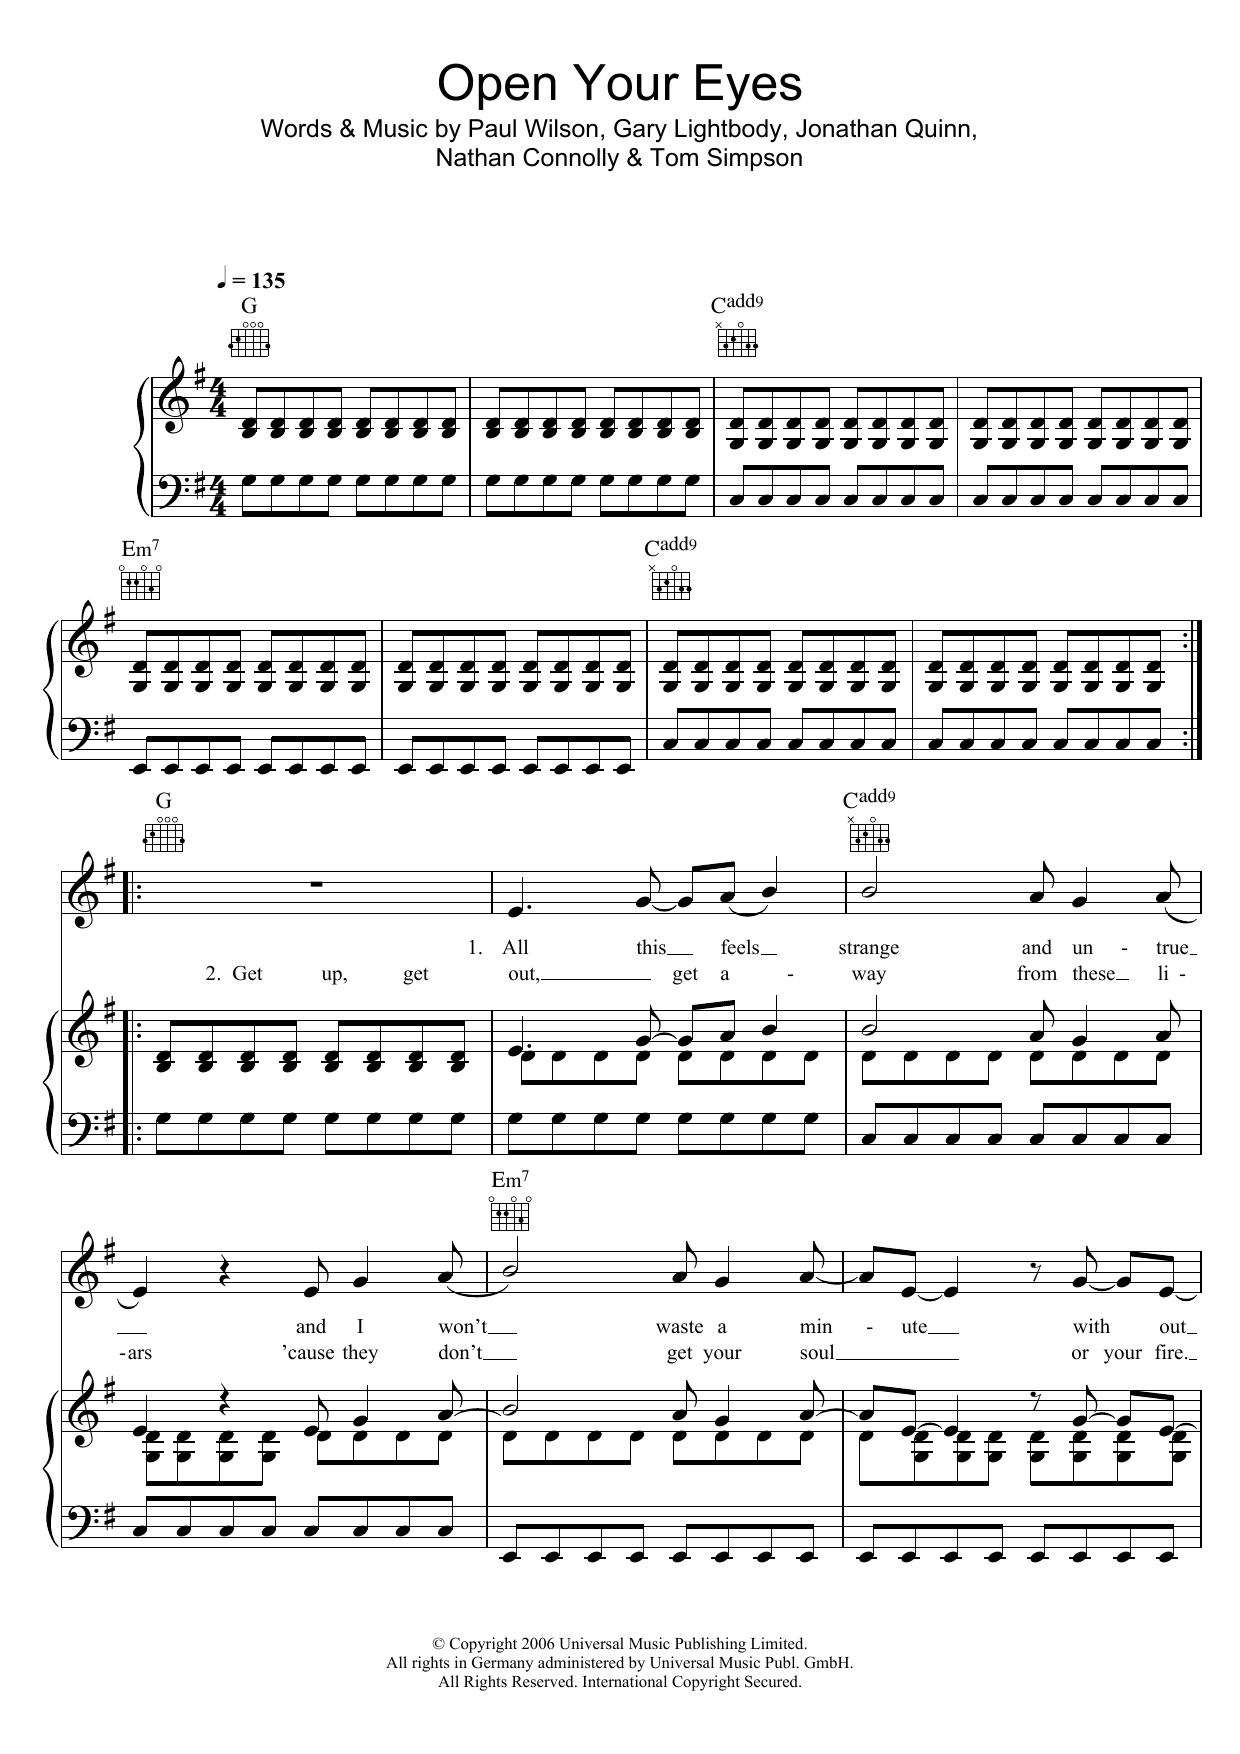 Download Snow Patrol Open Your Eyes Sheet Music